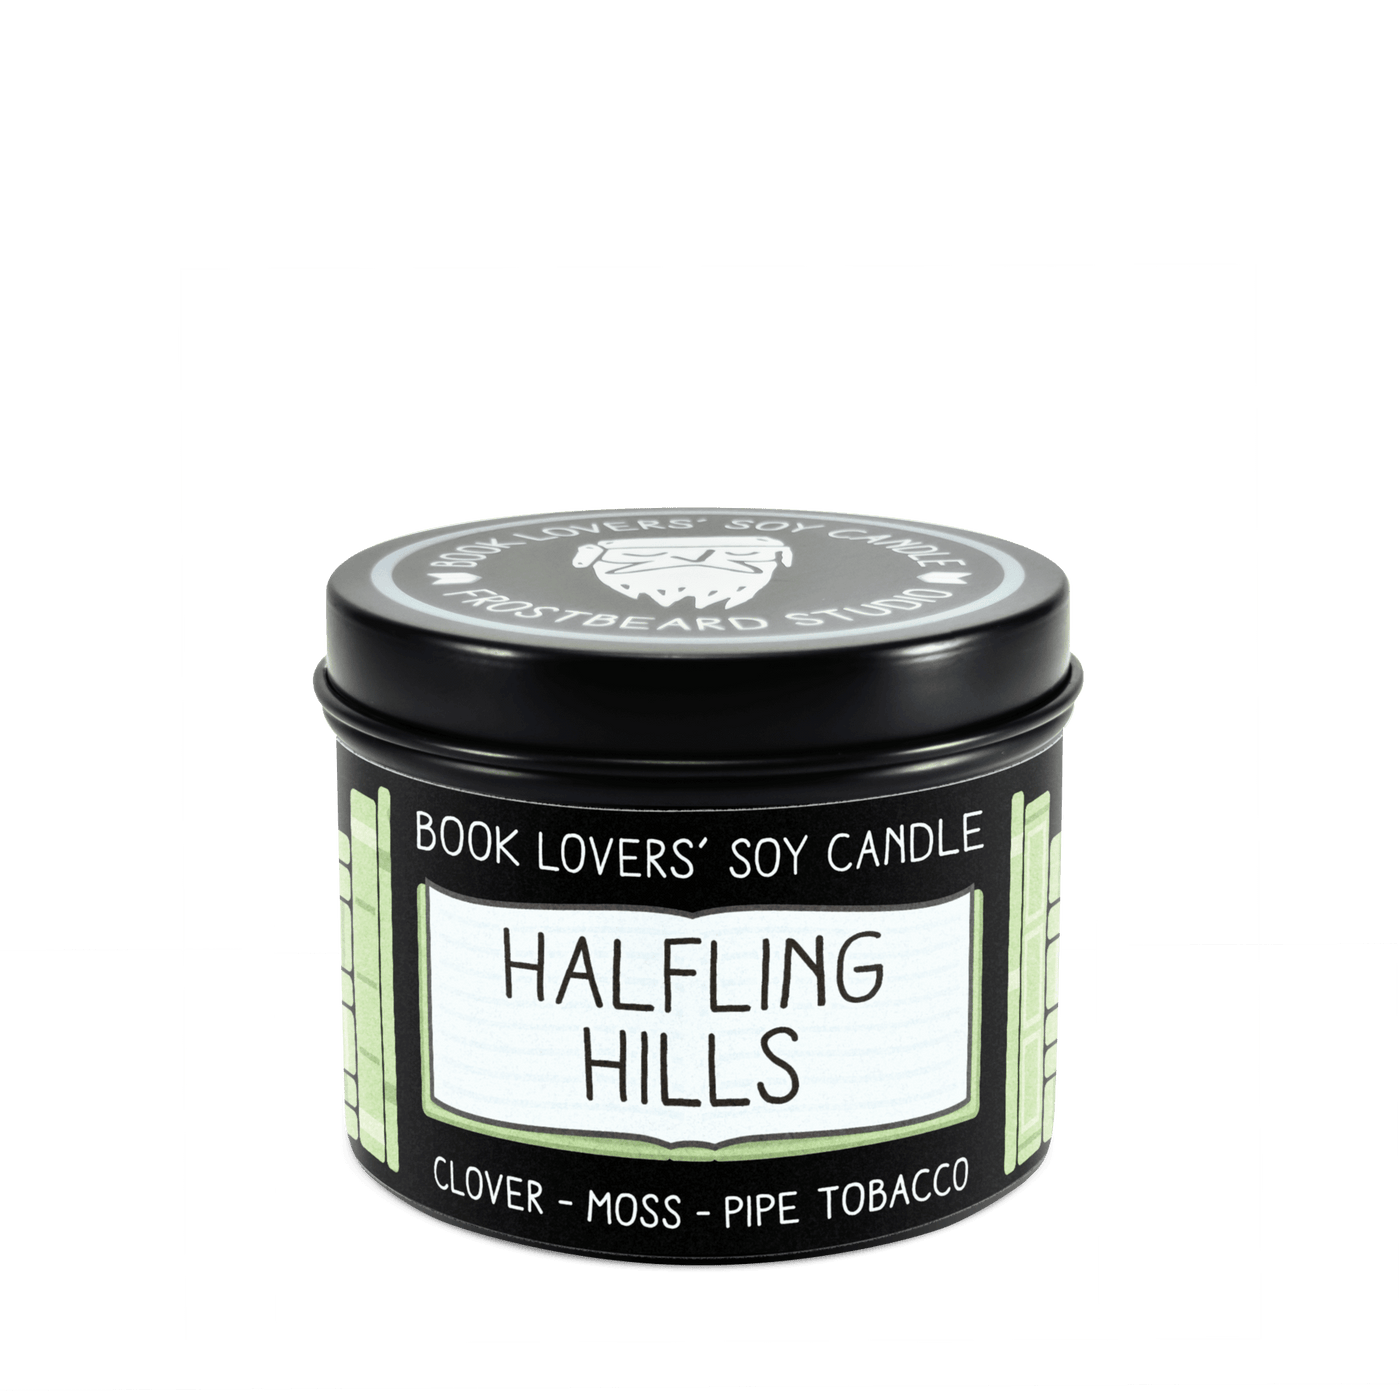 Halfling Hills - 4 oz Tin - Book Lovers' Soy Candle - Frostbeard Studio